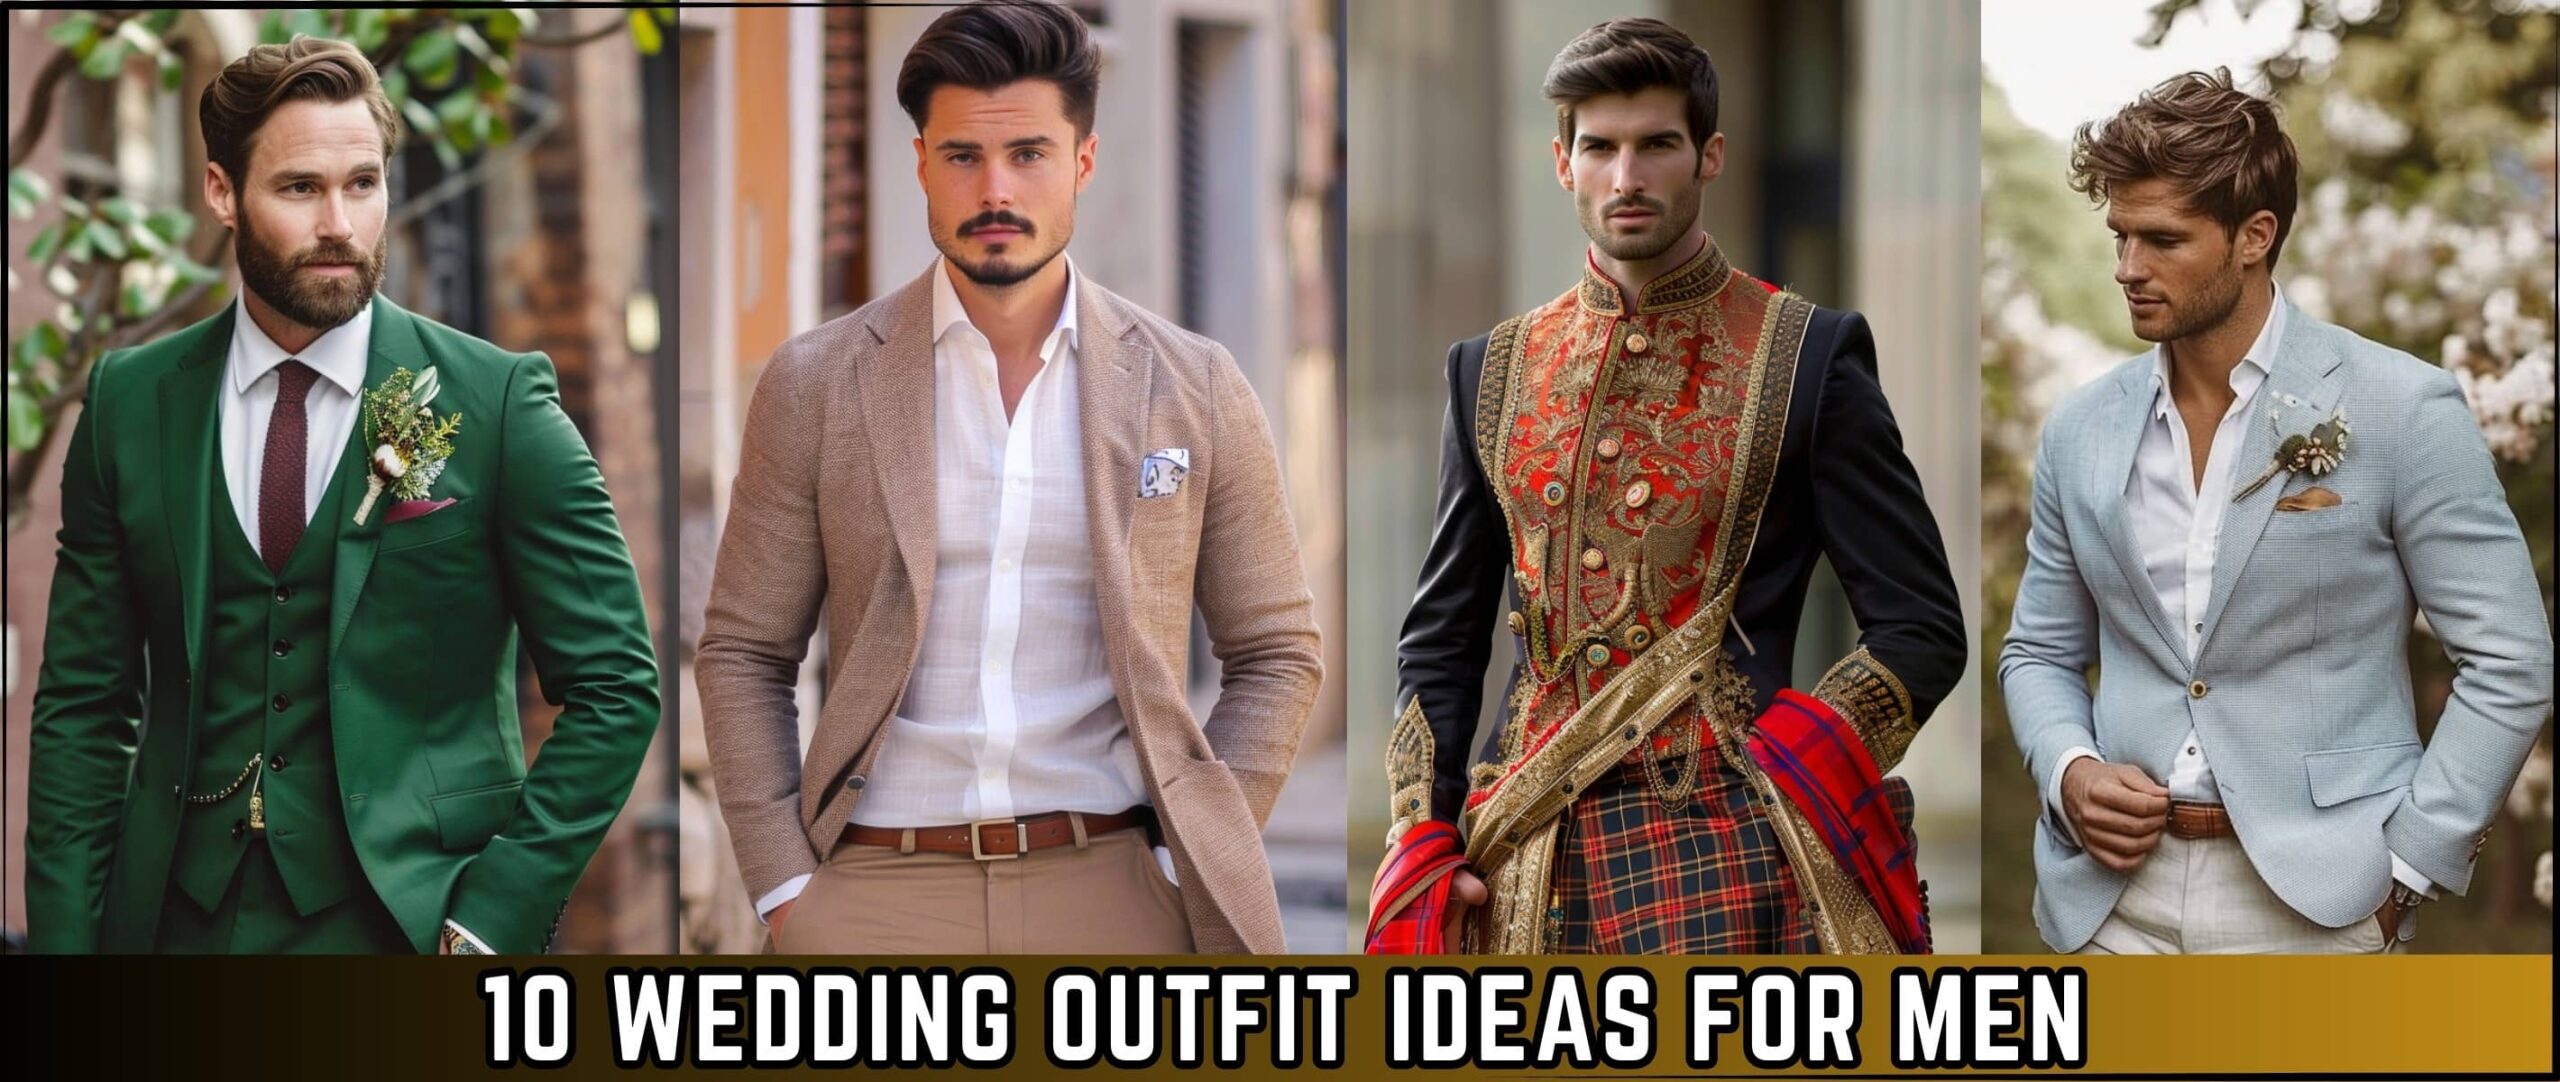 10 Wedding Outfit Ideas for Men